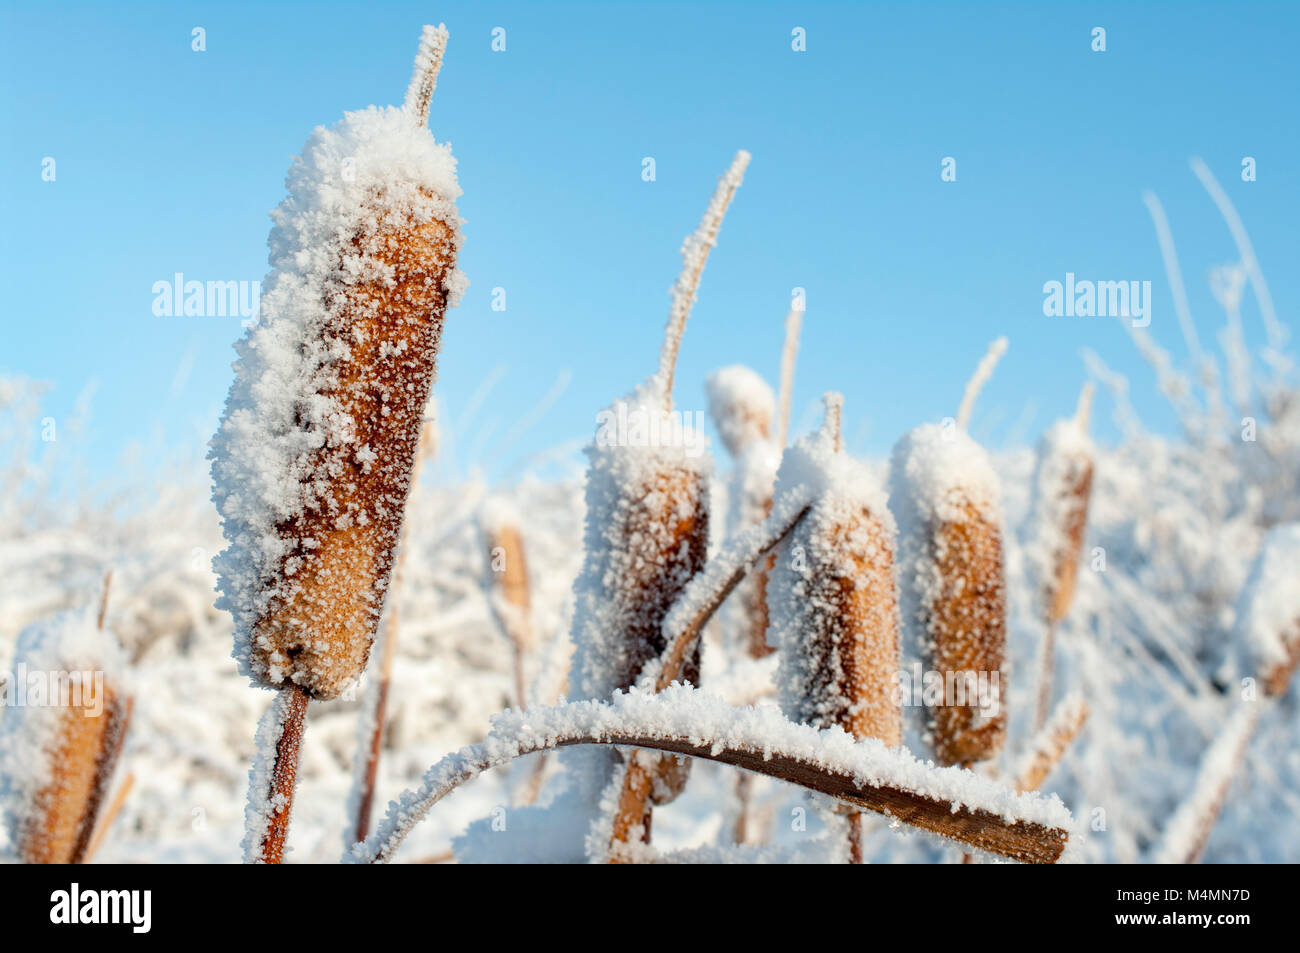 Alberta, Canada.  Closeup of bulrushes/cattails covered in hoarfrost against a blue sky in winter. Stock Photo